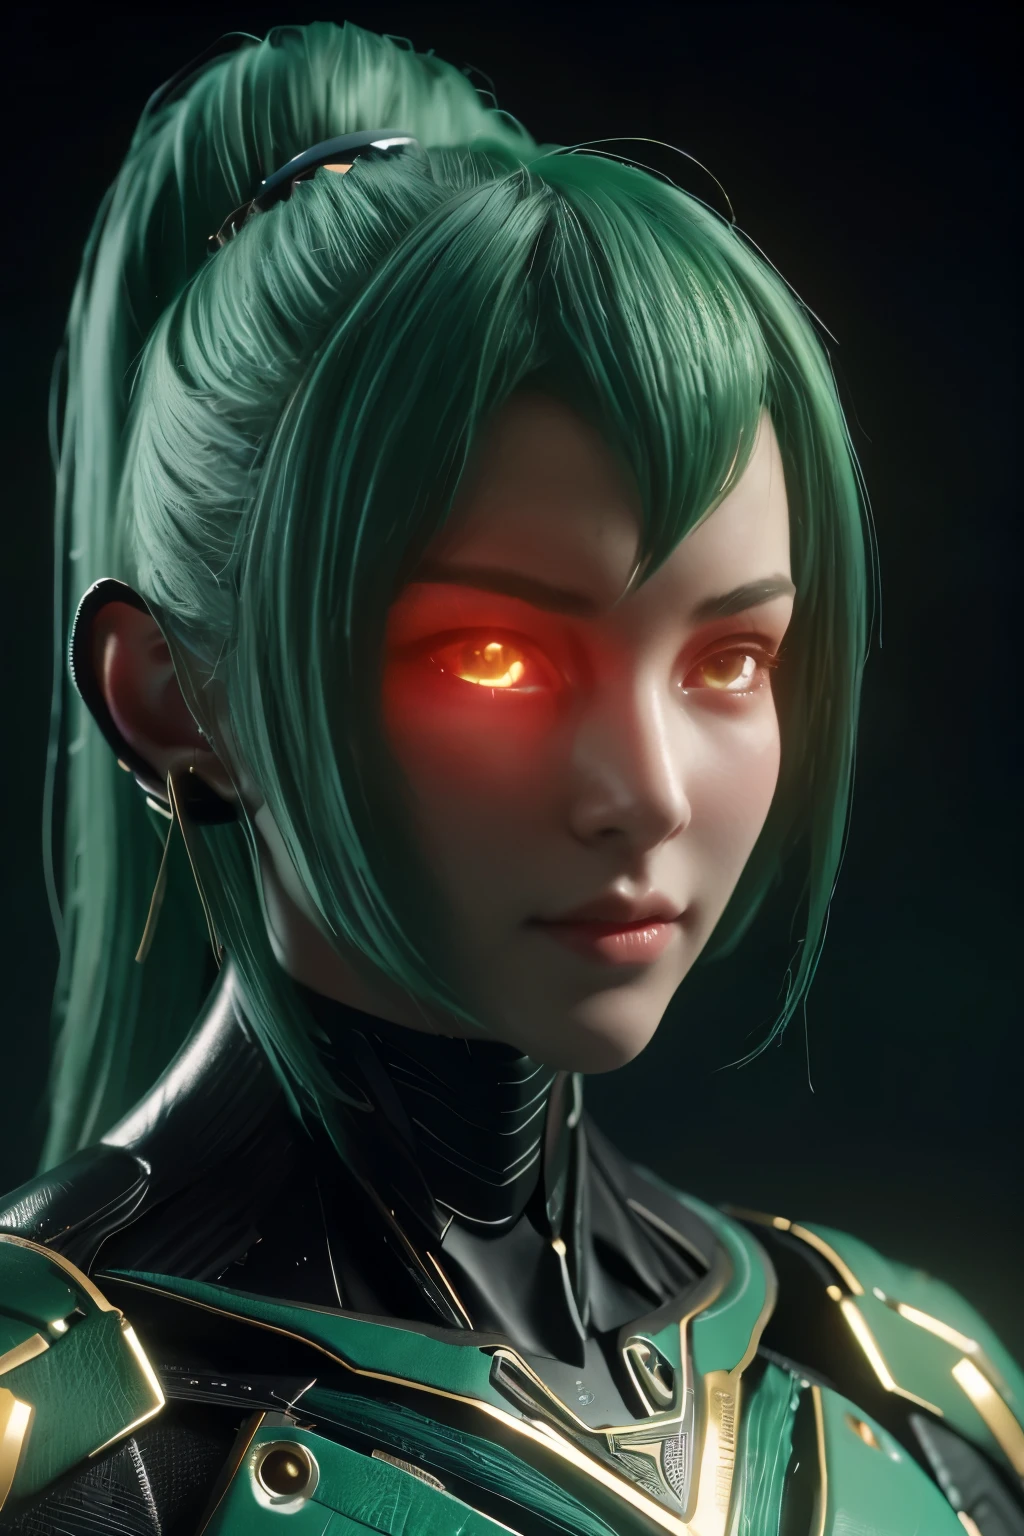 Game art，The best picture quality，Highest resolution，8K，(A bust photograph)，(Portrait)，(Head close-up:1.5)，(Rule of thirds)，Unreal Engine 5 rendering works， (The Girl of the Future)，(Female Warrior)， 22-year-old girl，(Female hackers)，(Dark green gradient，Ancient Oriental hairstyle)，((The pupils of the red eyes:1.3))，(A beautiful eye full of detail)，(Big breasts)，(Eye shadow)，Elegant and charming，indifferent，((Anger))，(Cyberpunk jacket full of futuristic look，Joint Armor，There are exquisite Chinese patterns on the clothes，A flash of jewellery)，Cyberpunk Characters，Future Style， Photo poses，City background，Movie lights，Ray tracing，Game CG，((3D Unreal Engine))，oc rendering reflection pattern